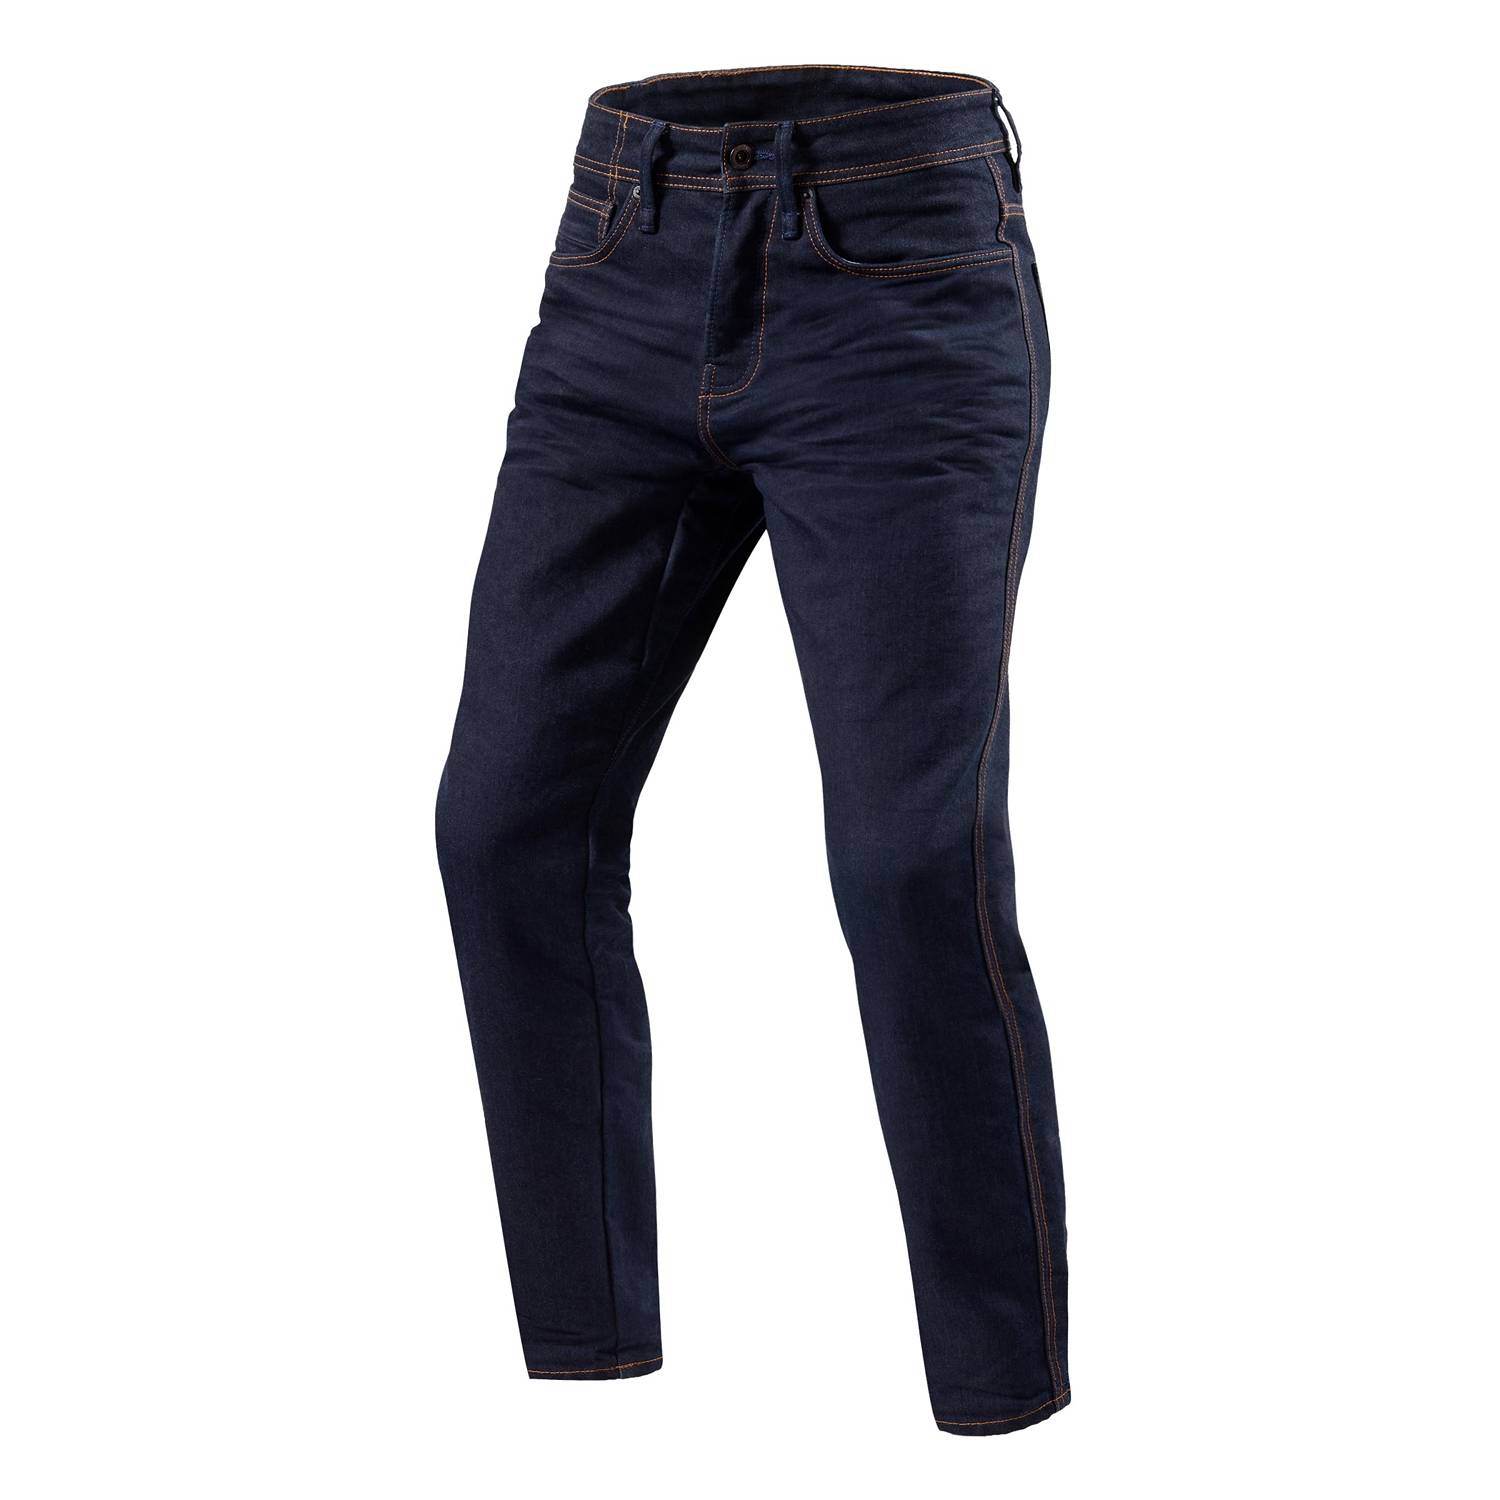 Image of REV'IT! Jeans Reed RF Dark Blue Used Motorcycle Jeans Size L32/W32 ID 8700001336994